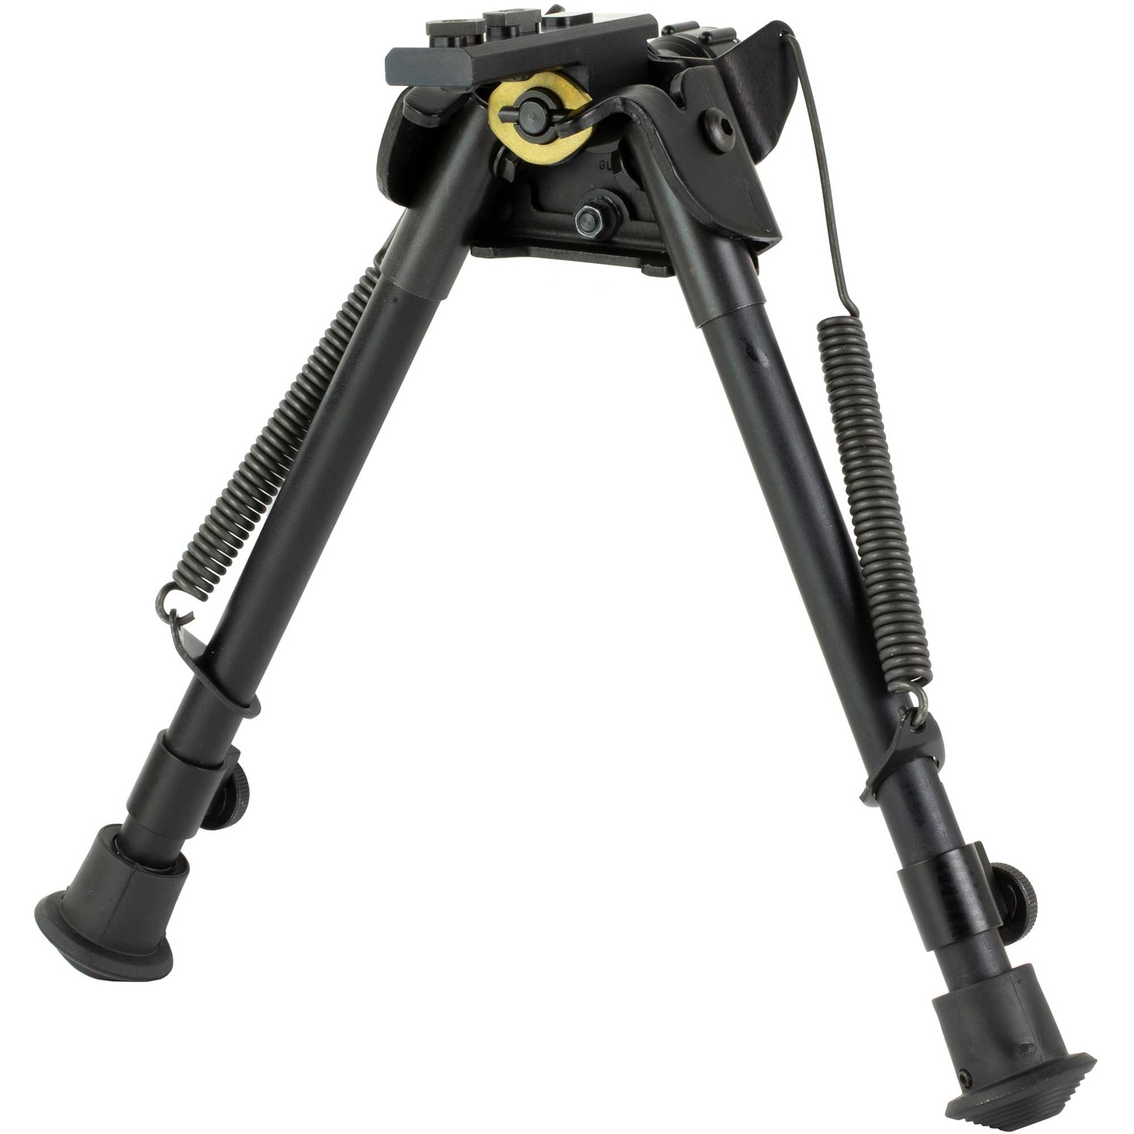 Harris 9 to 13 in. Rotating Self Leveling Bipod, Black - Image 2 of 3